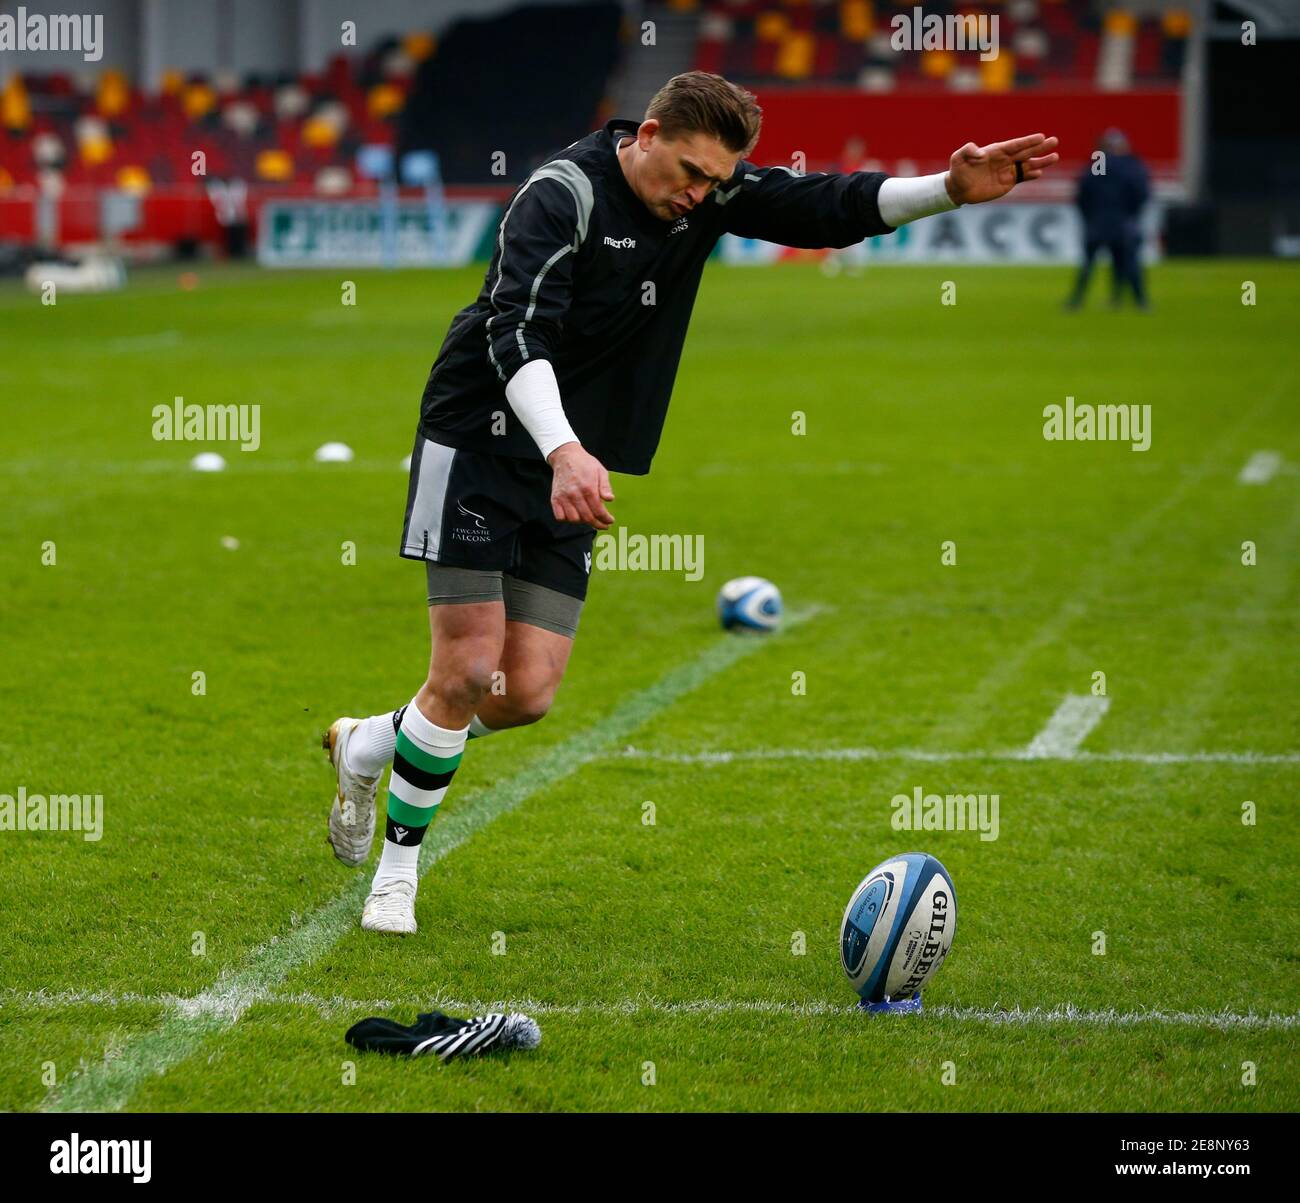 BRENTFORD, ENGLAND - JANUARY 31: Toby Flood of Newcastle Falcons during warm up during Gallagher Premiership between London Irish and Newcastle Flacons at Brentford Community Stadium, Brentford, UK on 31st January 2021 Credit: Action Foto Sport/Alamy Live News Stock Photo